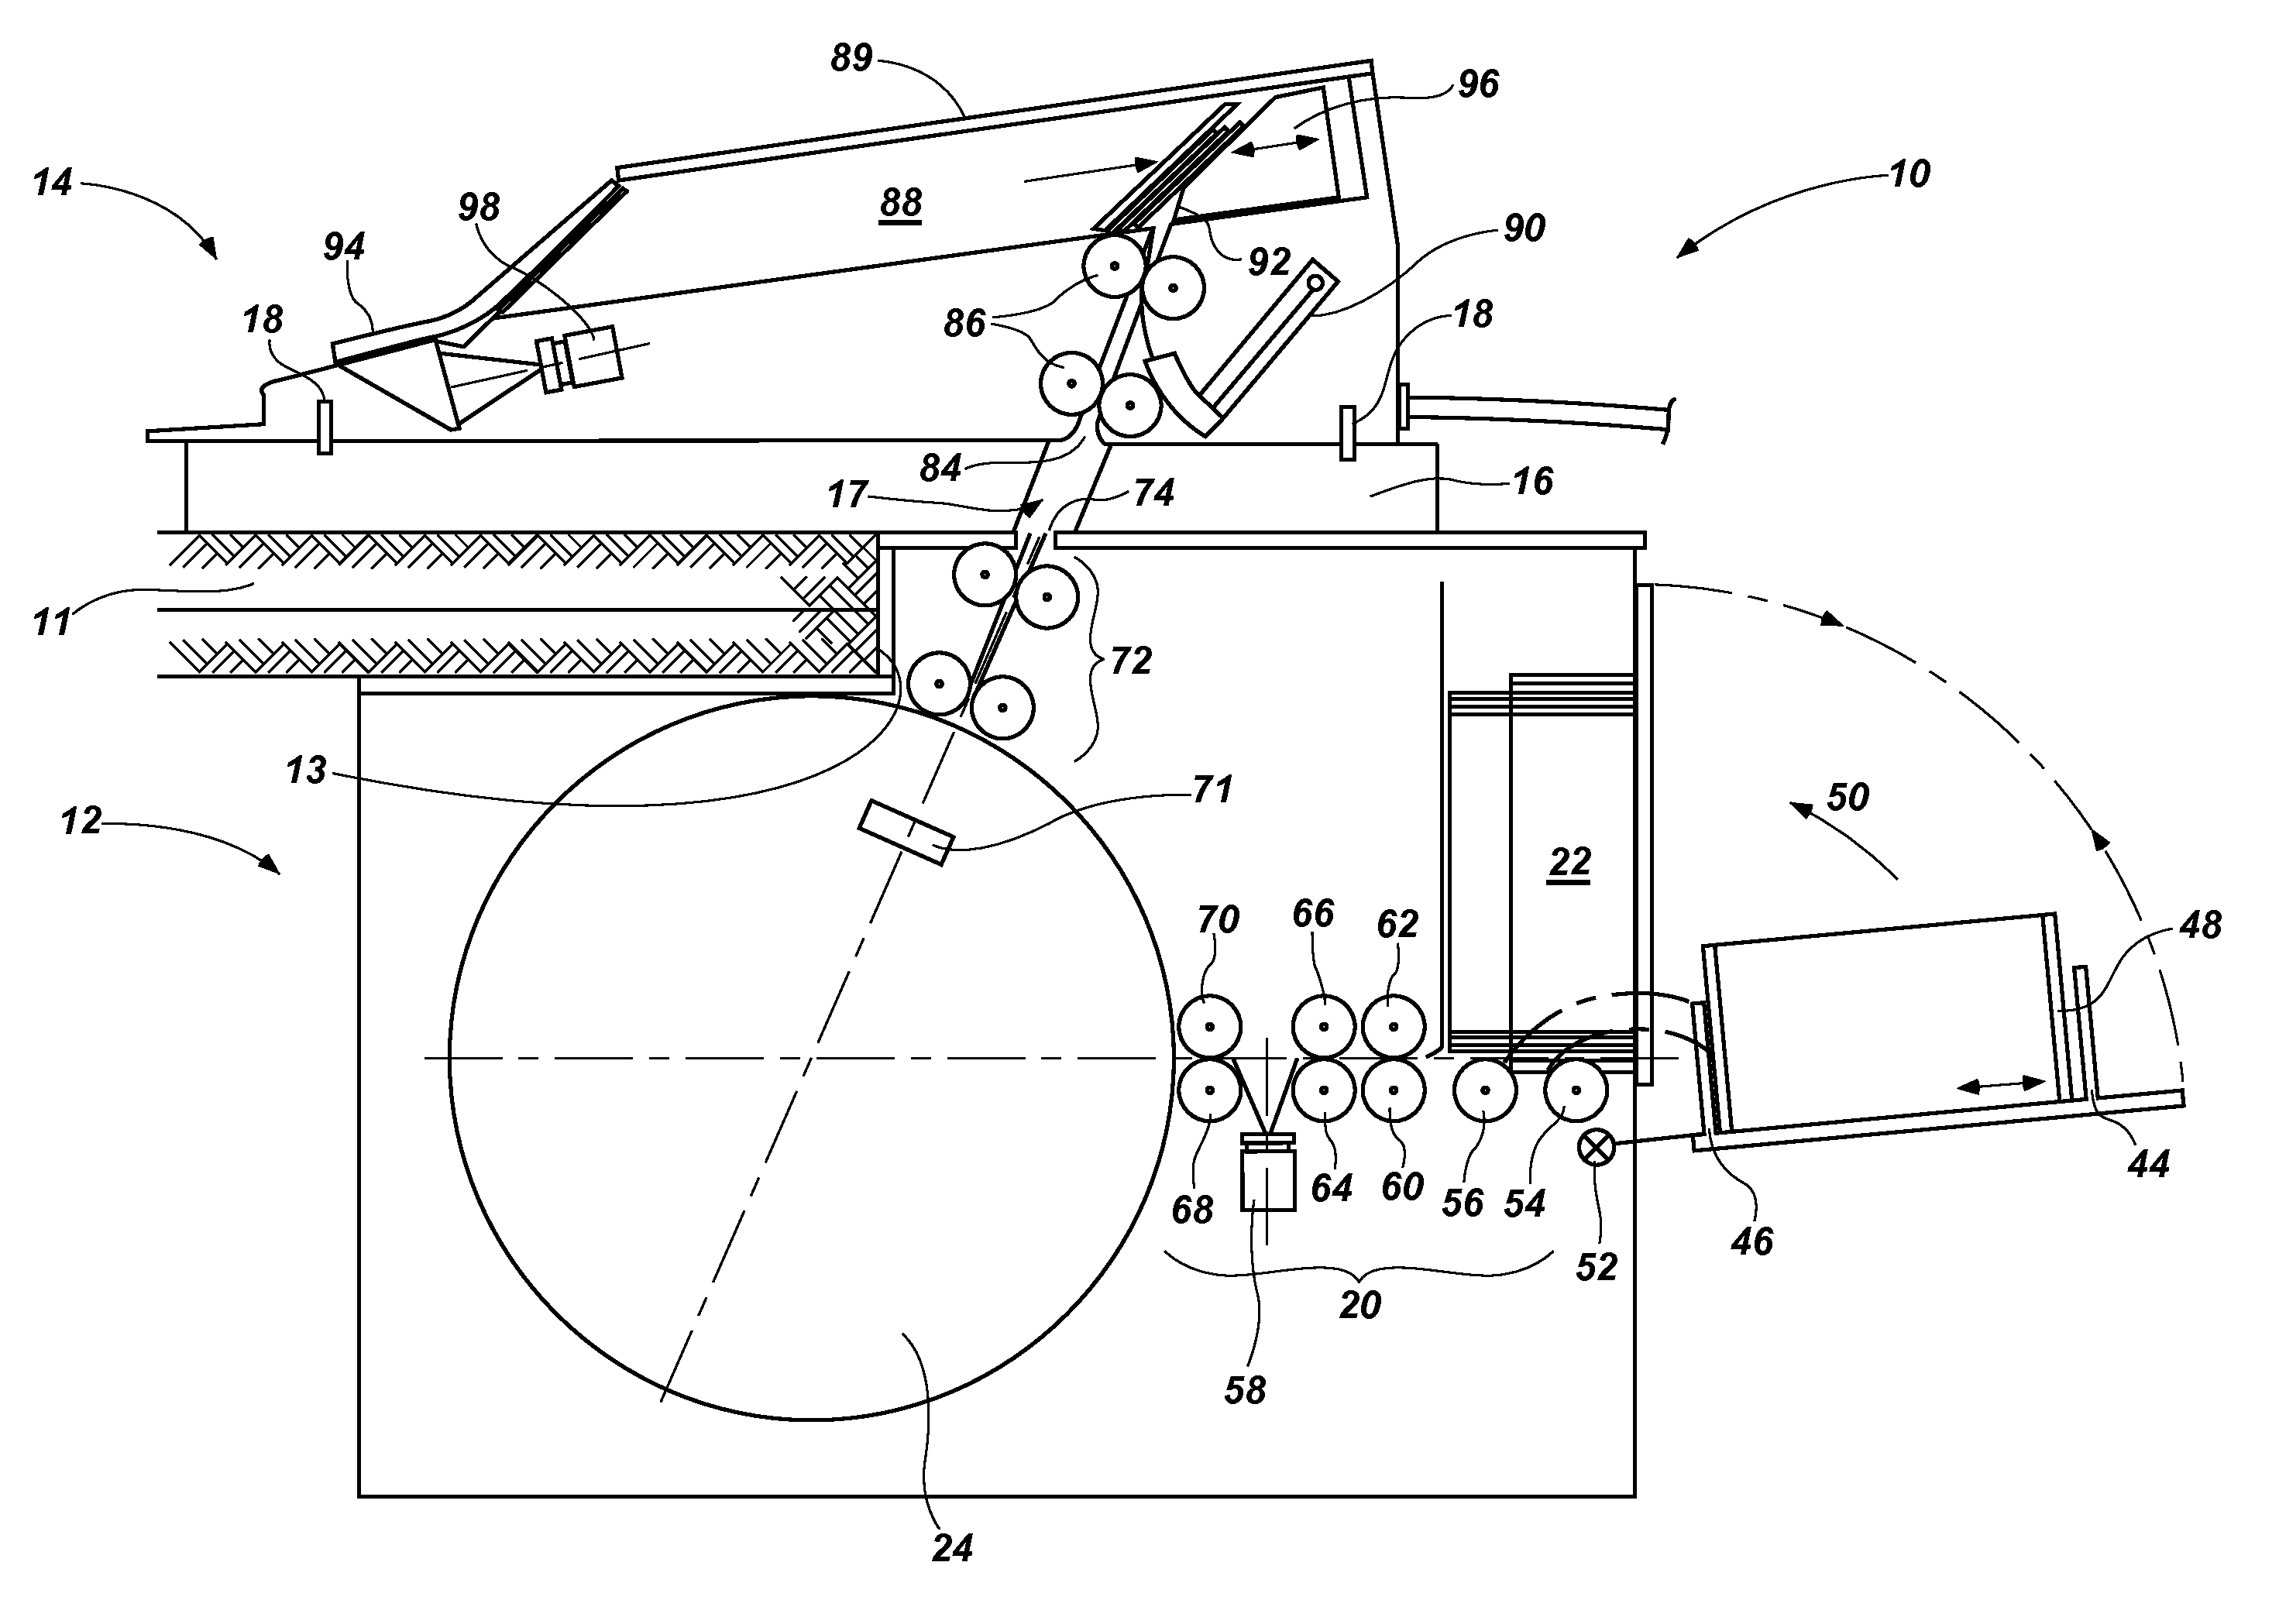 Card handling systems, devices for use in card handling systems and related methods